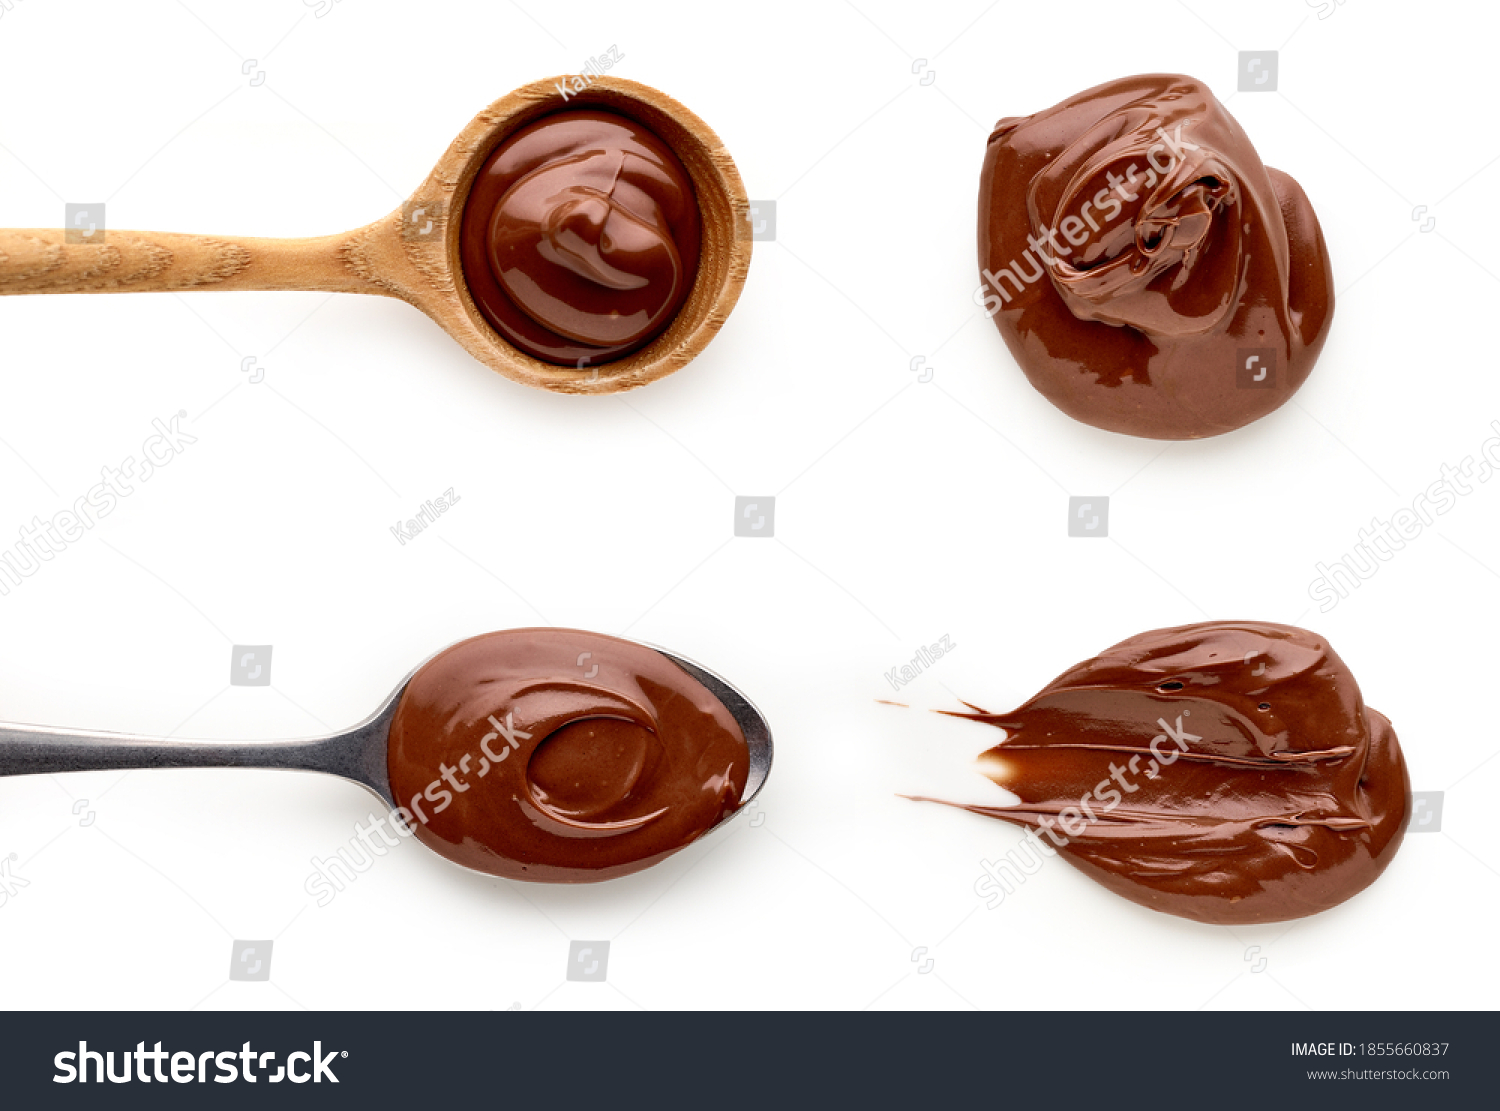 Chocolate nougat cream in spoons isolated on white background, top view #1855660837